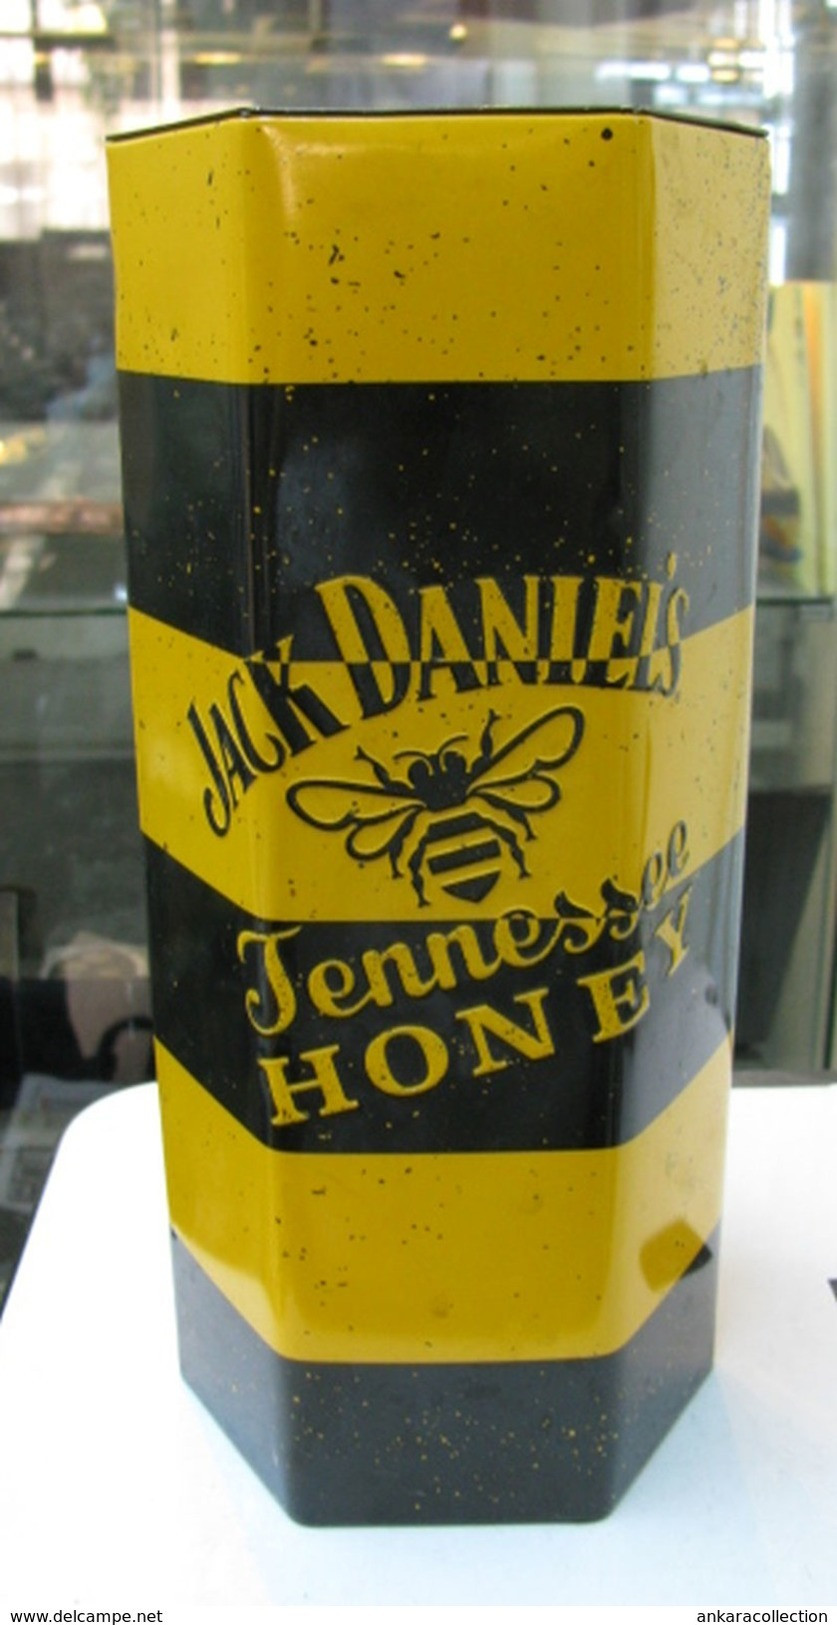 AC - JACK DANIEL'S TENNESSEE HONEY WHISKEY A LITTLE BIT OF HONEY A WHOLE LOT OF JACK EMPTY TIN BOX BLIK FROM TURKEY - Cans